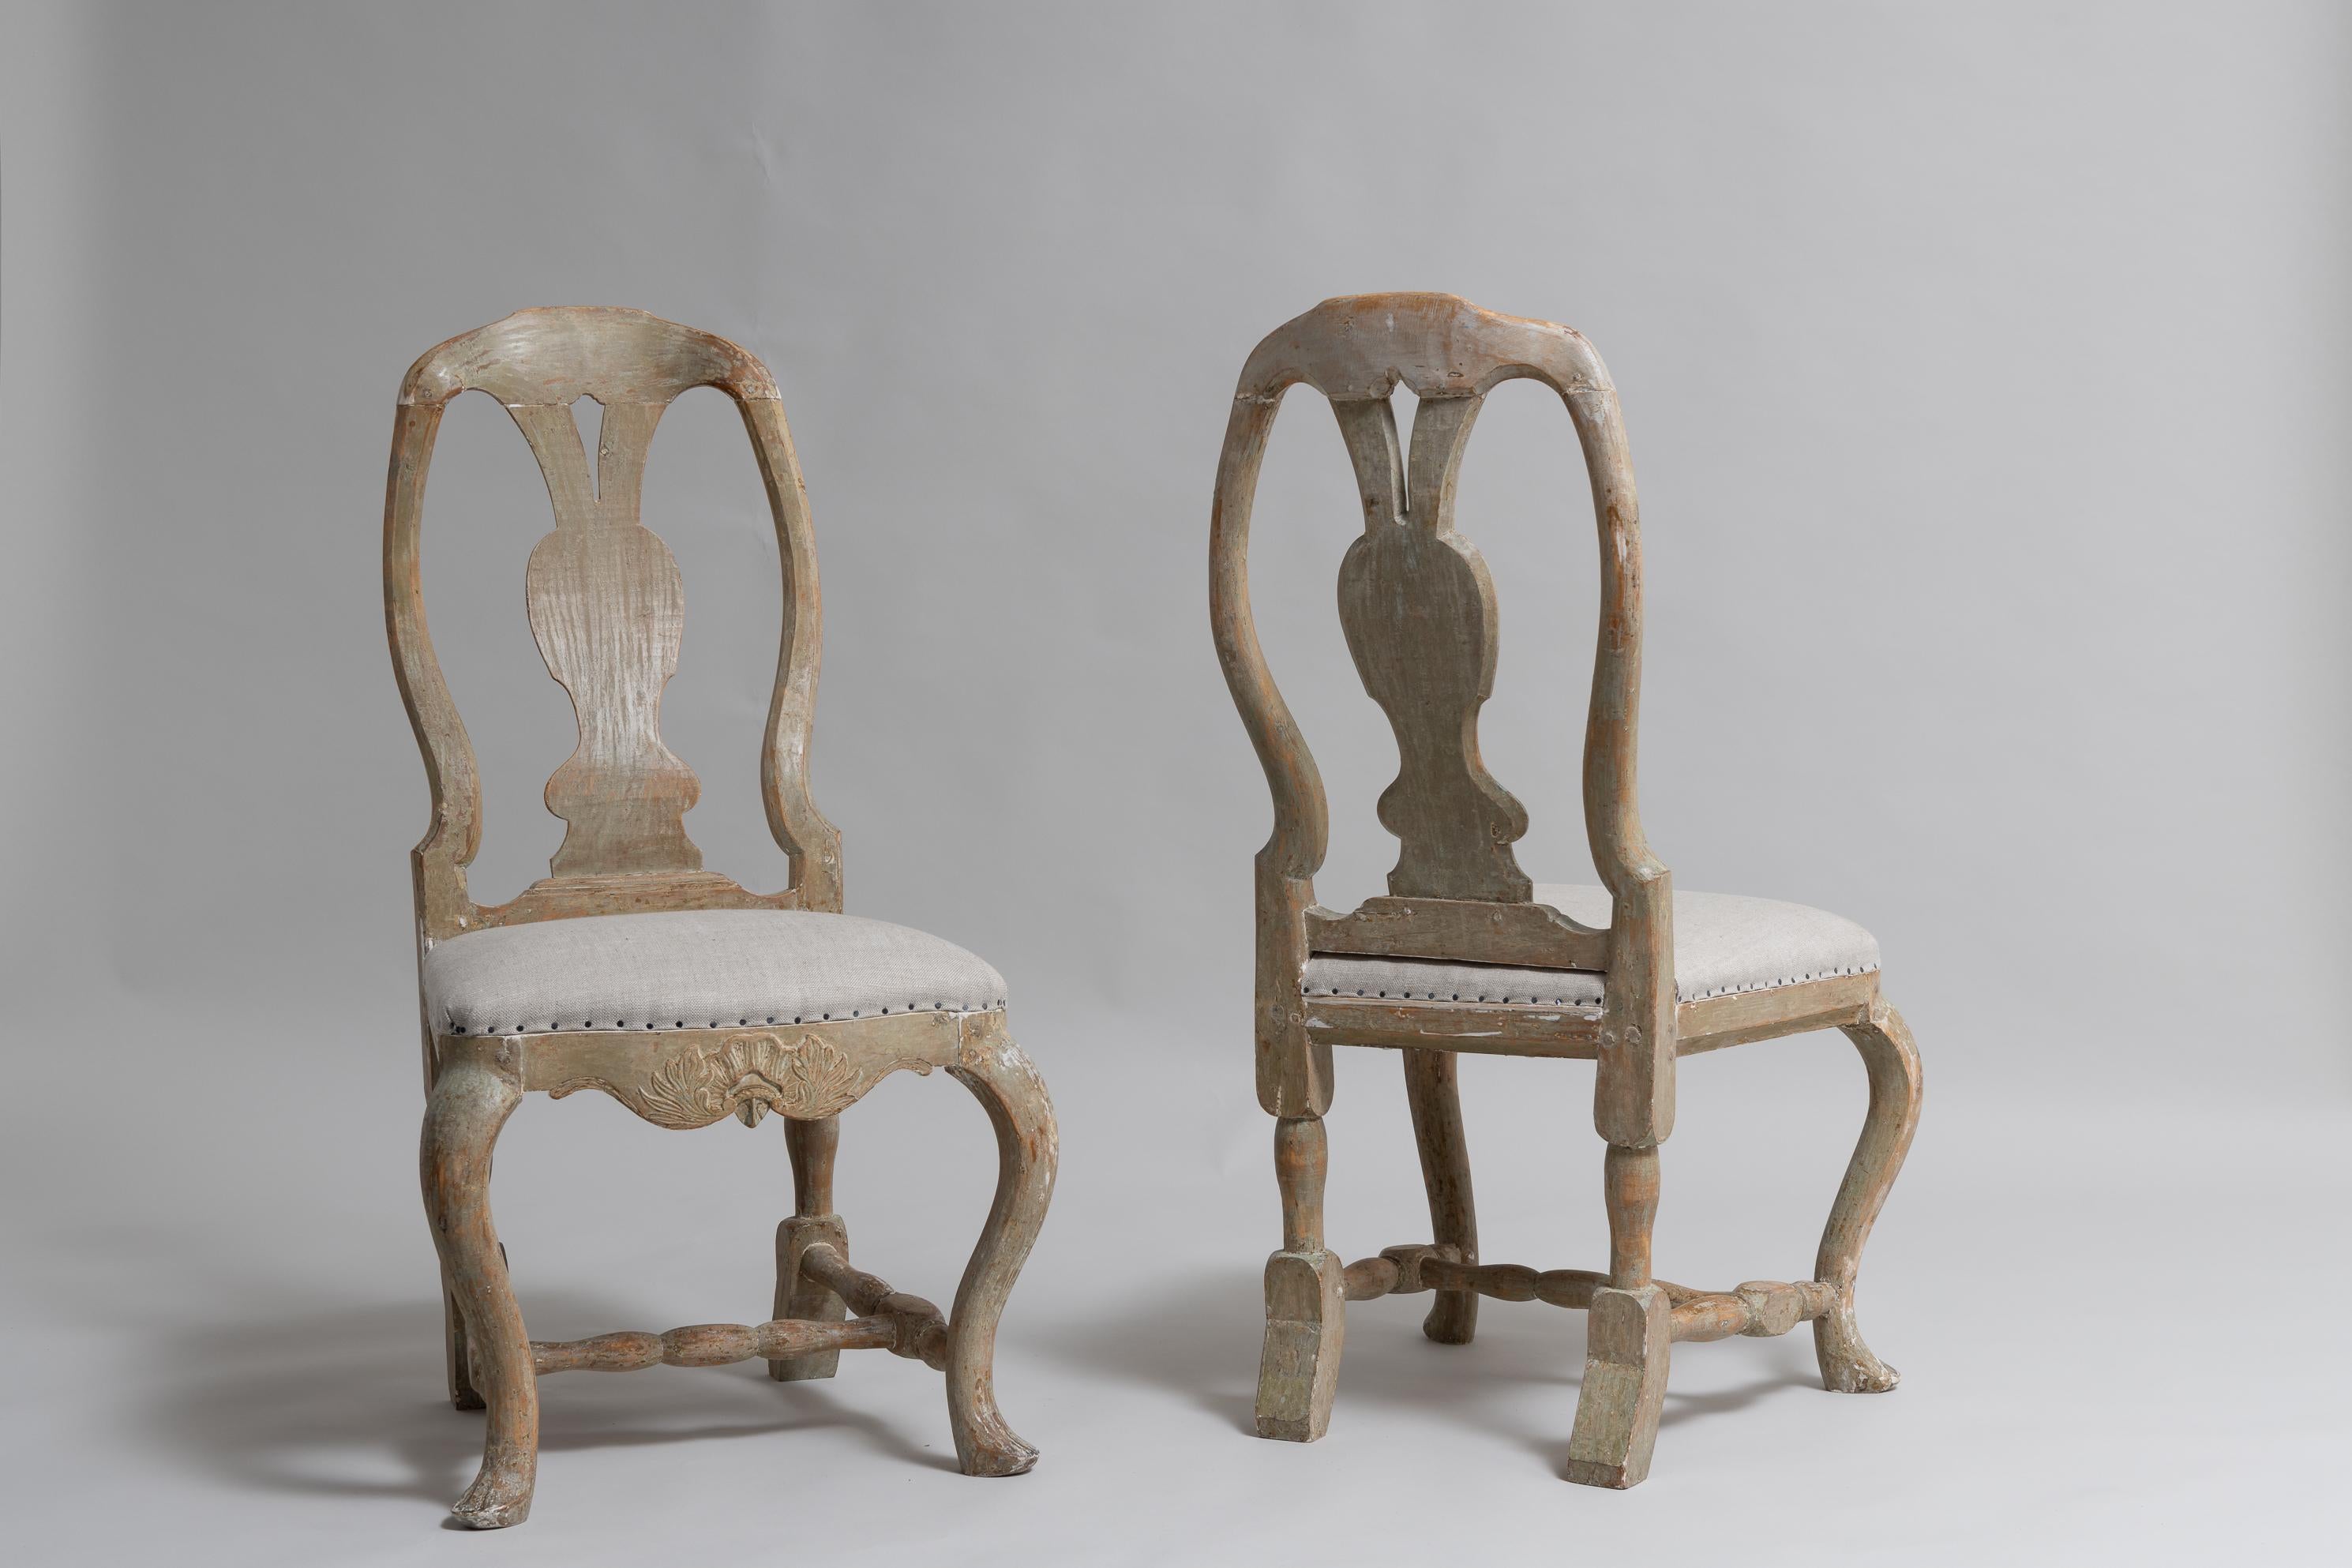 Hand-Crafted Set of 2 Northern Swedish Rococo Pine Chairs For Sale